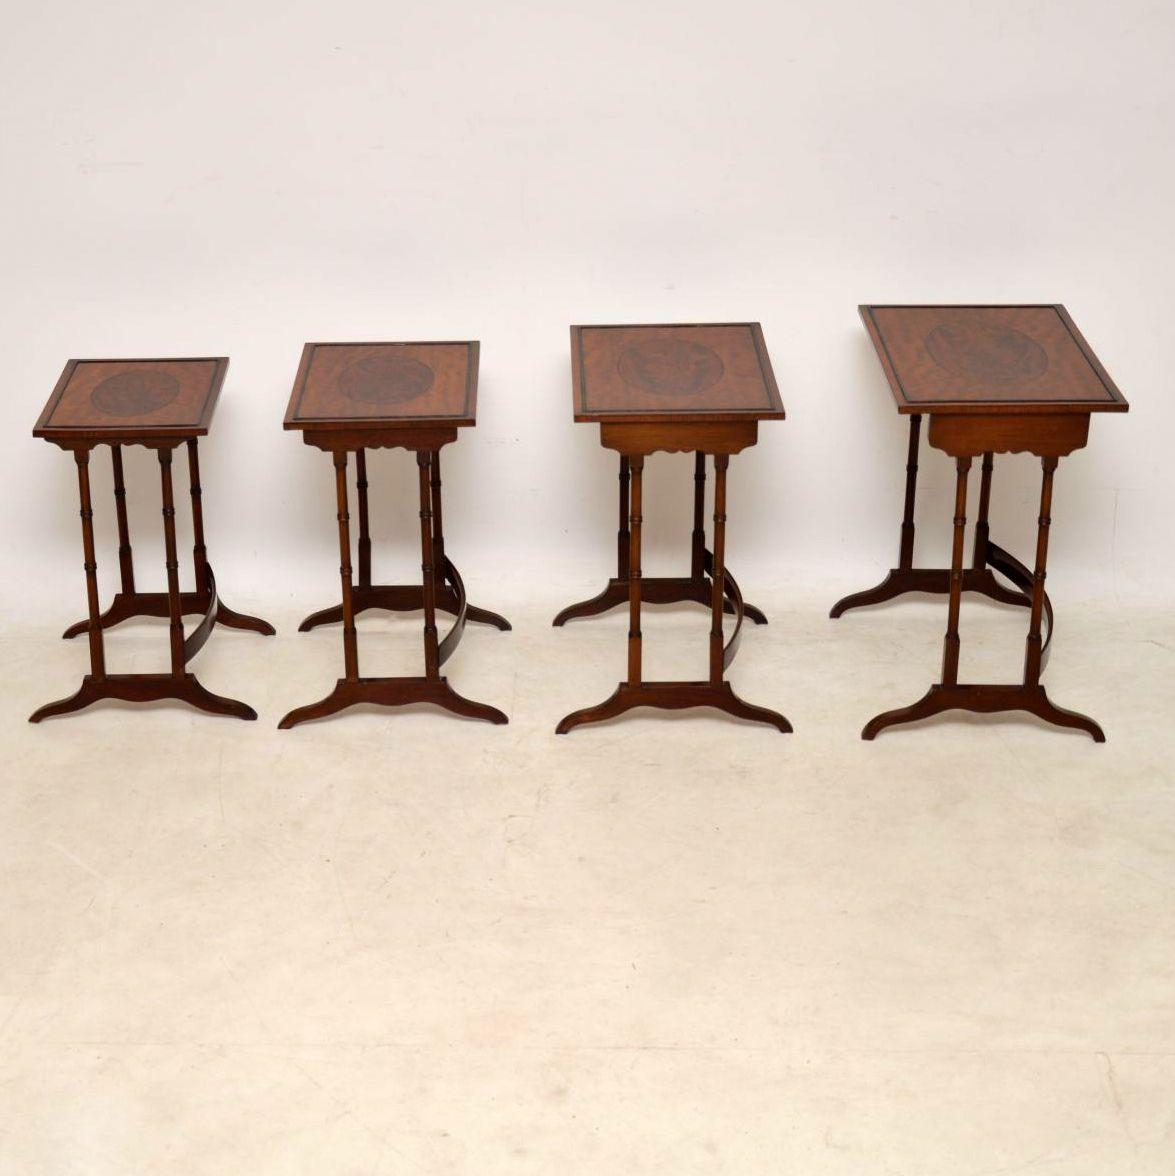 Antique Regency style nest of four tables in excellent condition dating to circa 1890-1910 period. They are beautifully made with lovely veneers, cross banding and inlays. I particularly like the flame mahogany oval panels in the middle of each